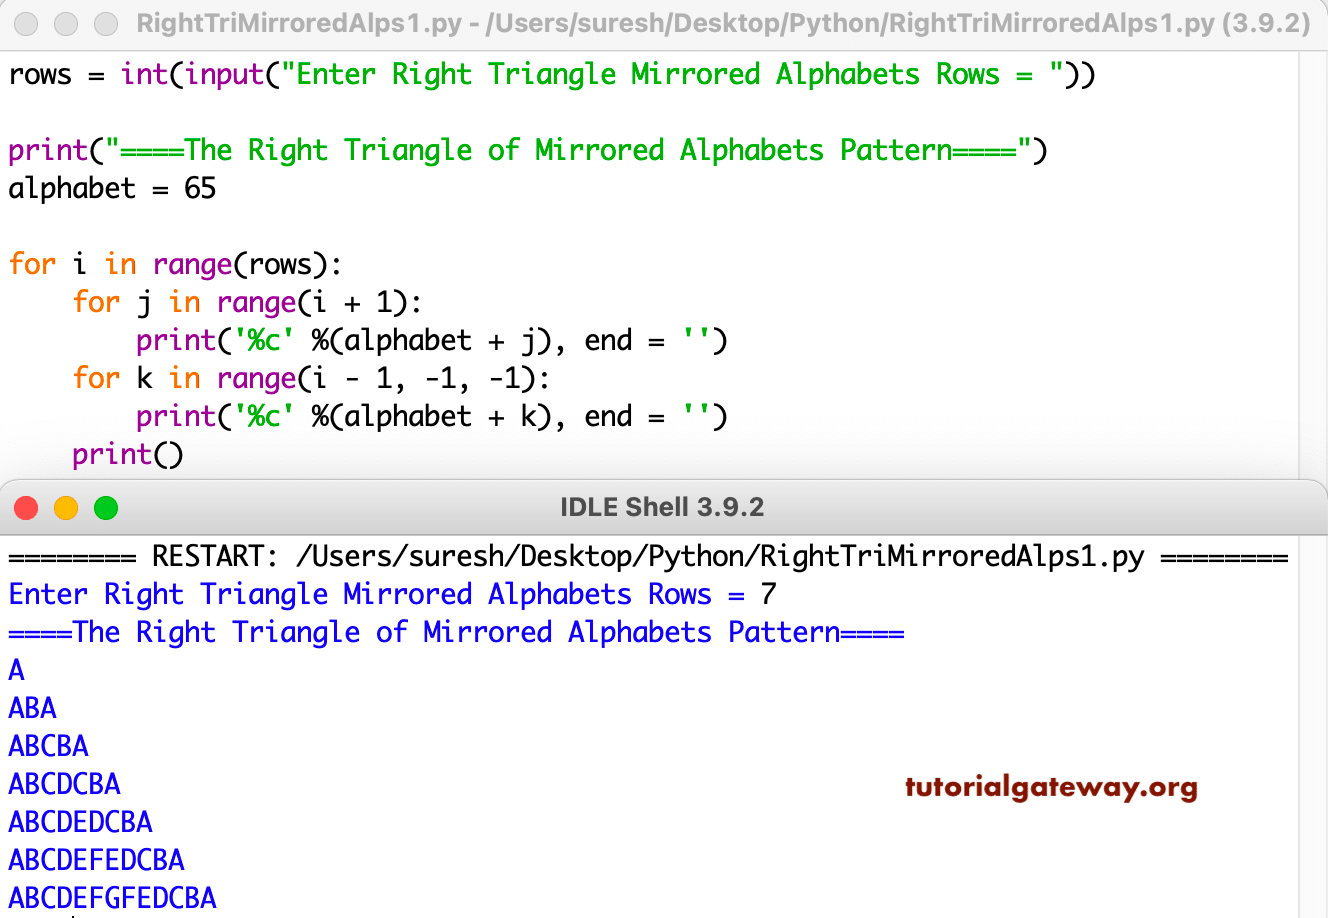 Python Program to Print Right Triangle of Mirrored Alphabets Pattern